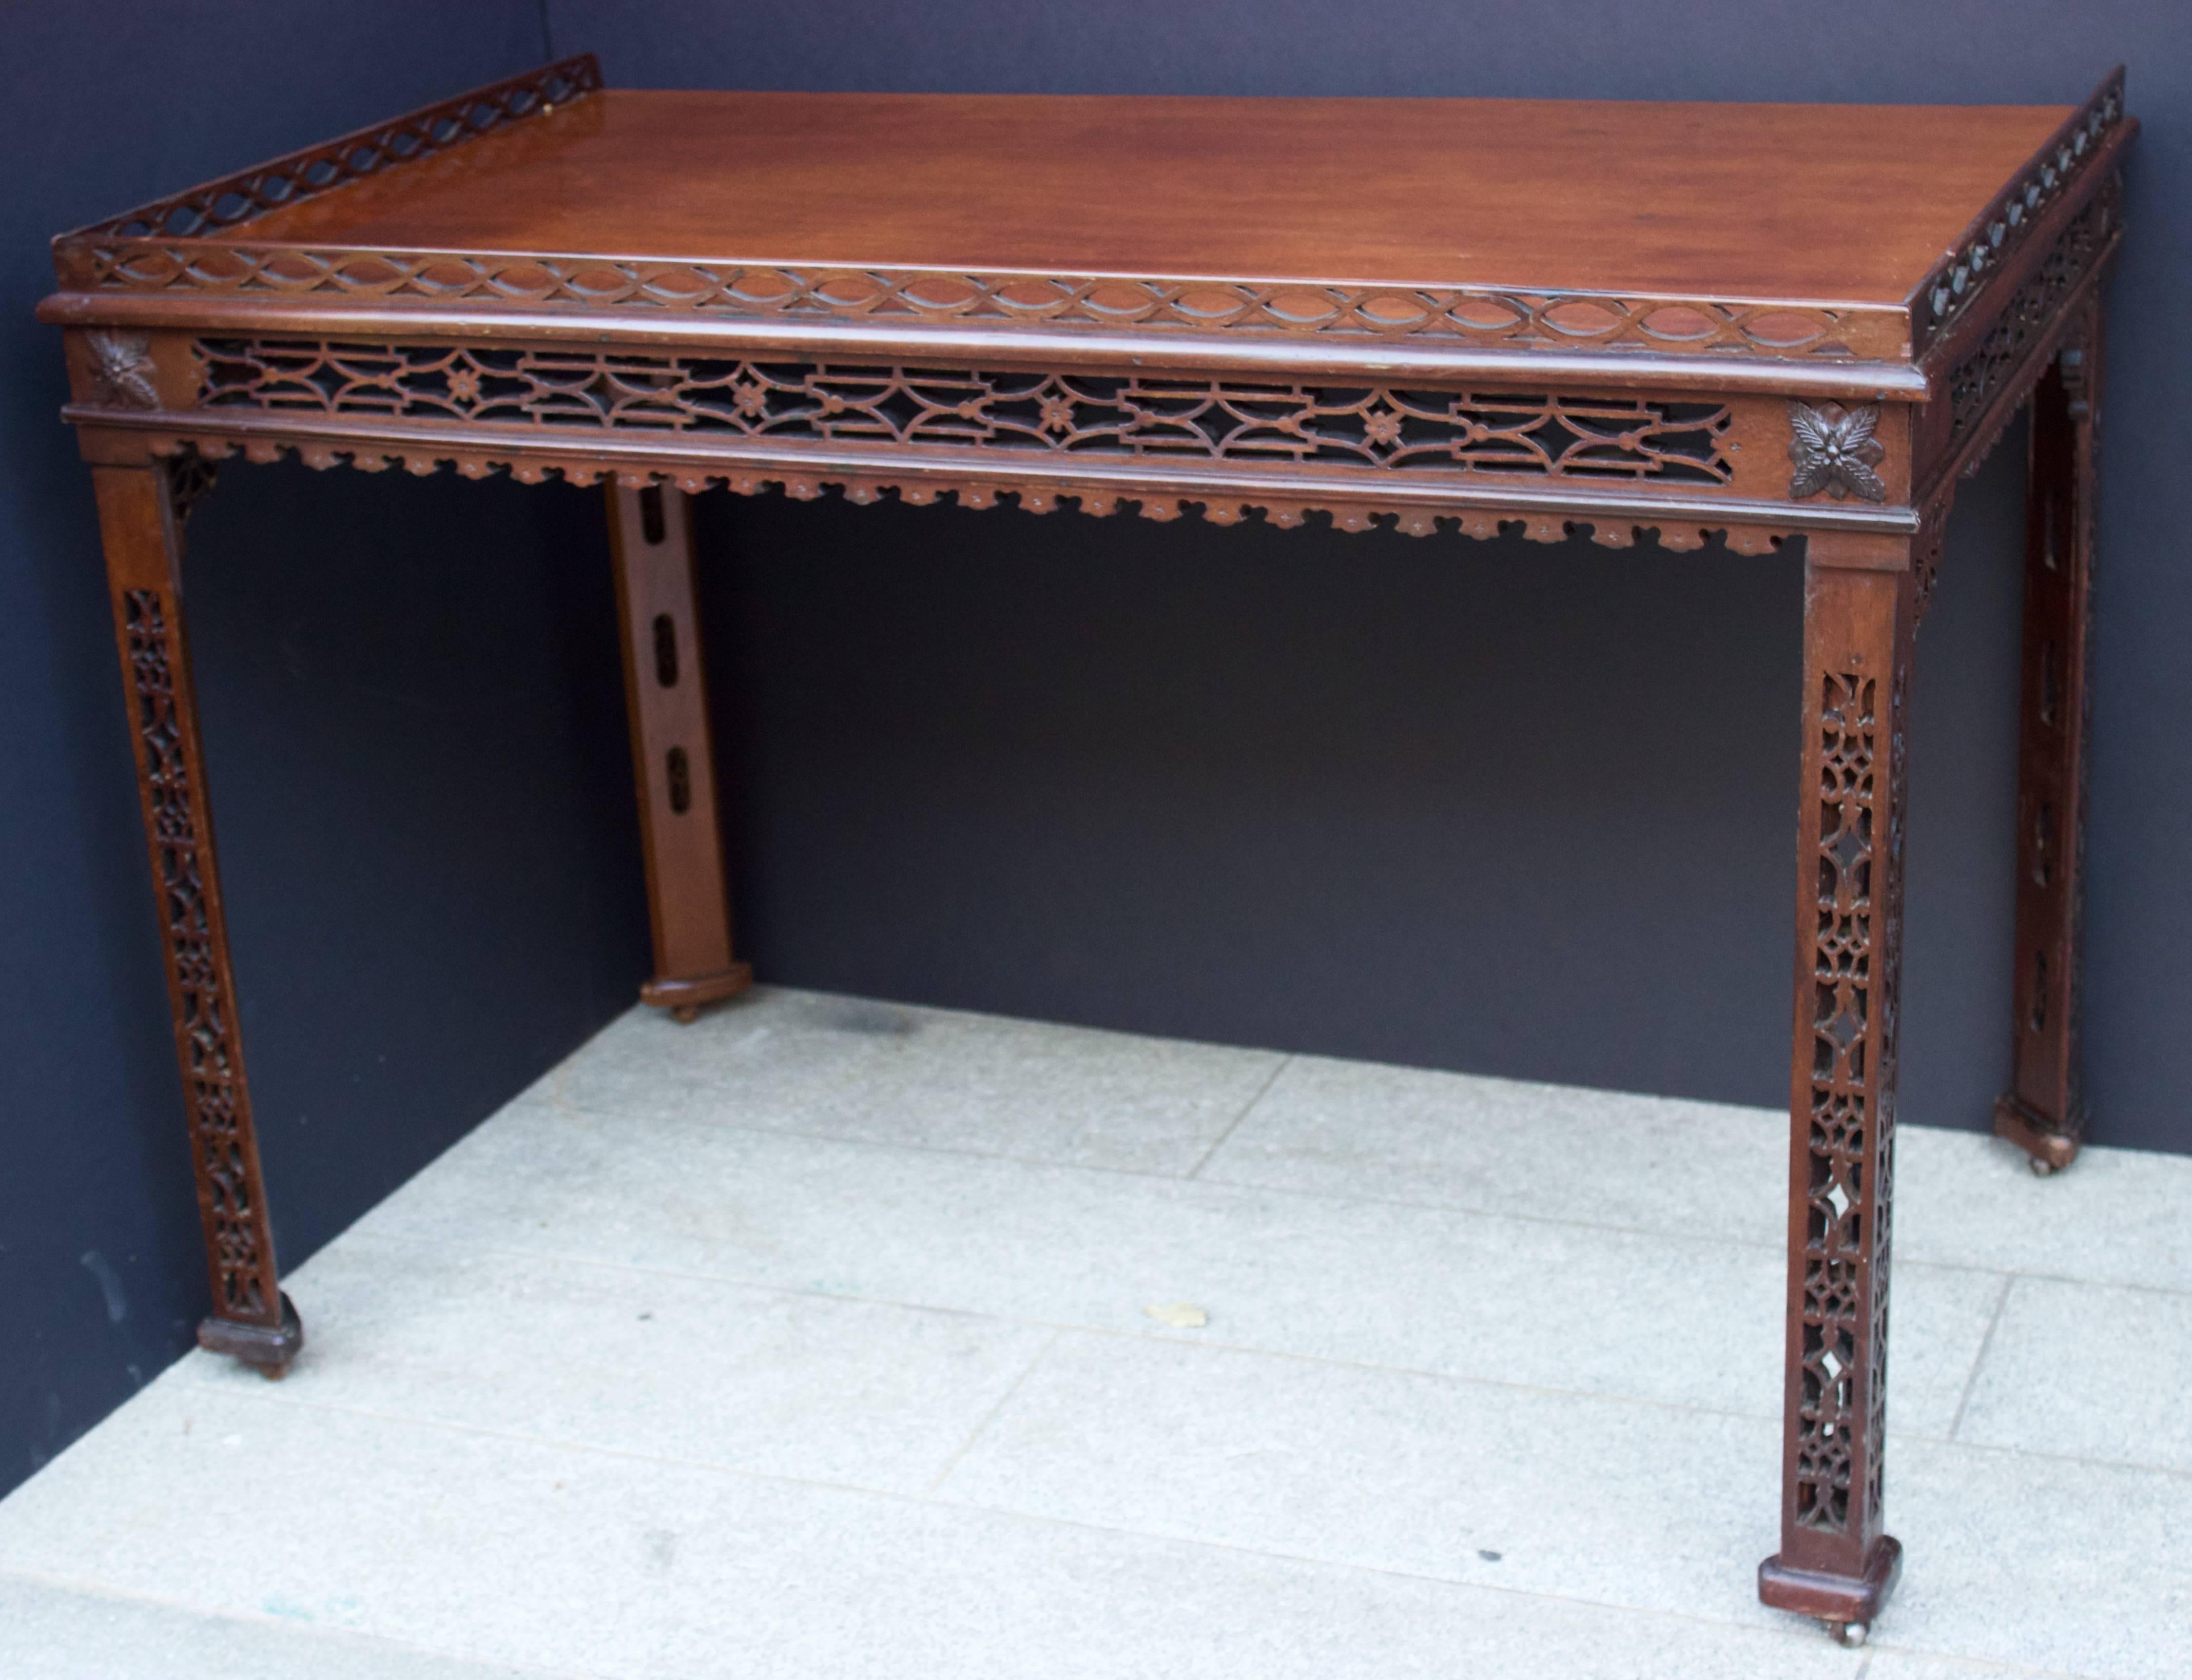 Thomas Chippendale wrote in 1762: “This table was intended for holding a set of China and maybe use as a tea table”.
China tables were popular in Britain but produced in America were British influence was strong (Portsmouth NH, Charleston SC…). The